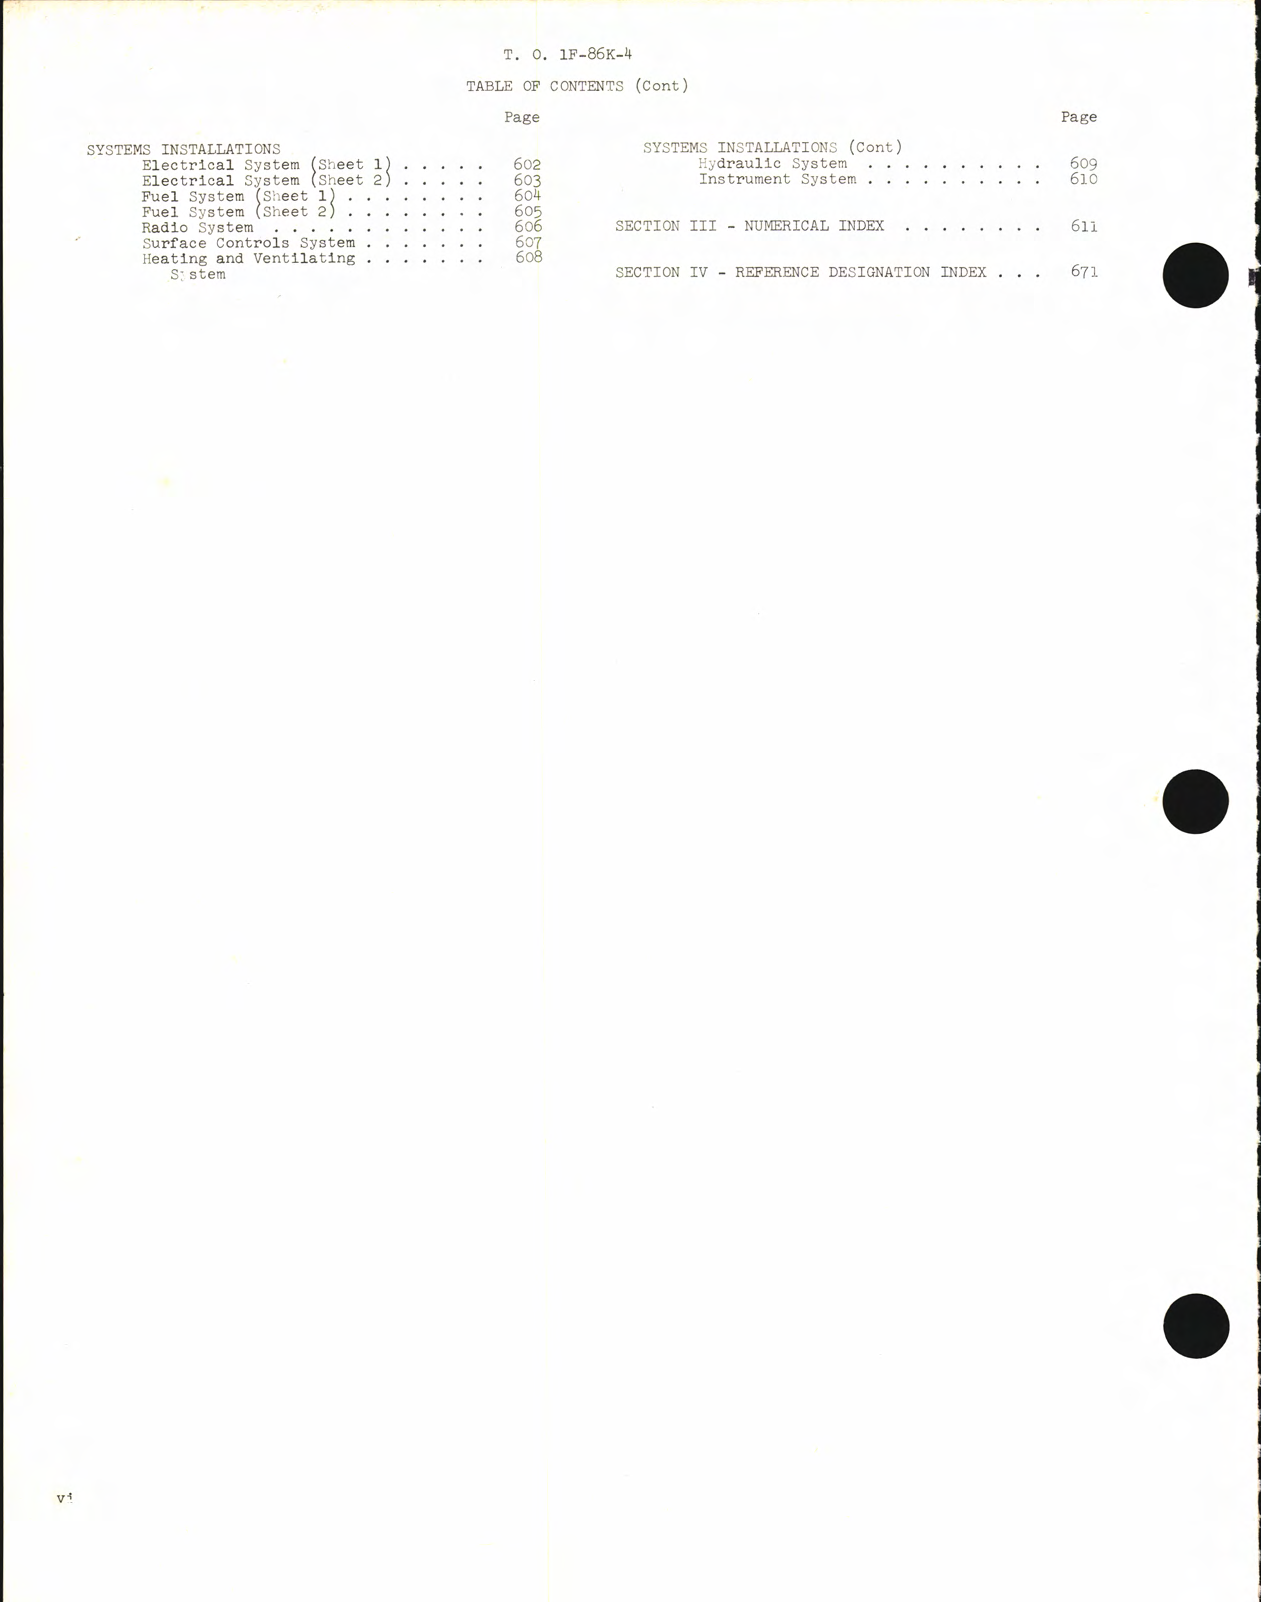 Sample page 8 from AirCorps Library document: Illustrated Parts Breakdown for F-86K Aircraft